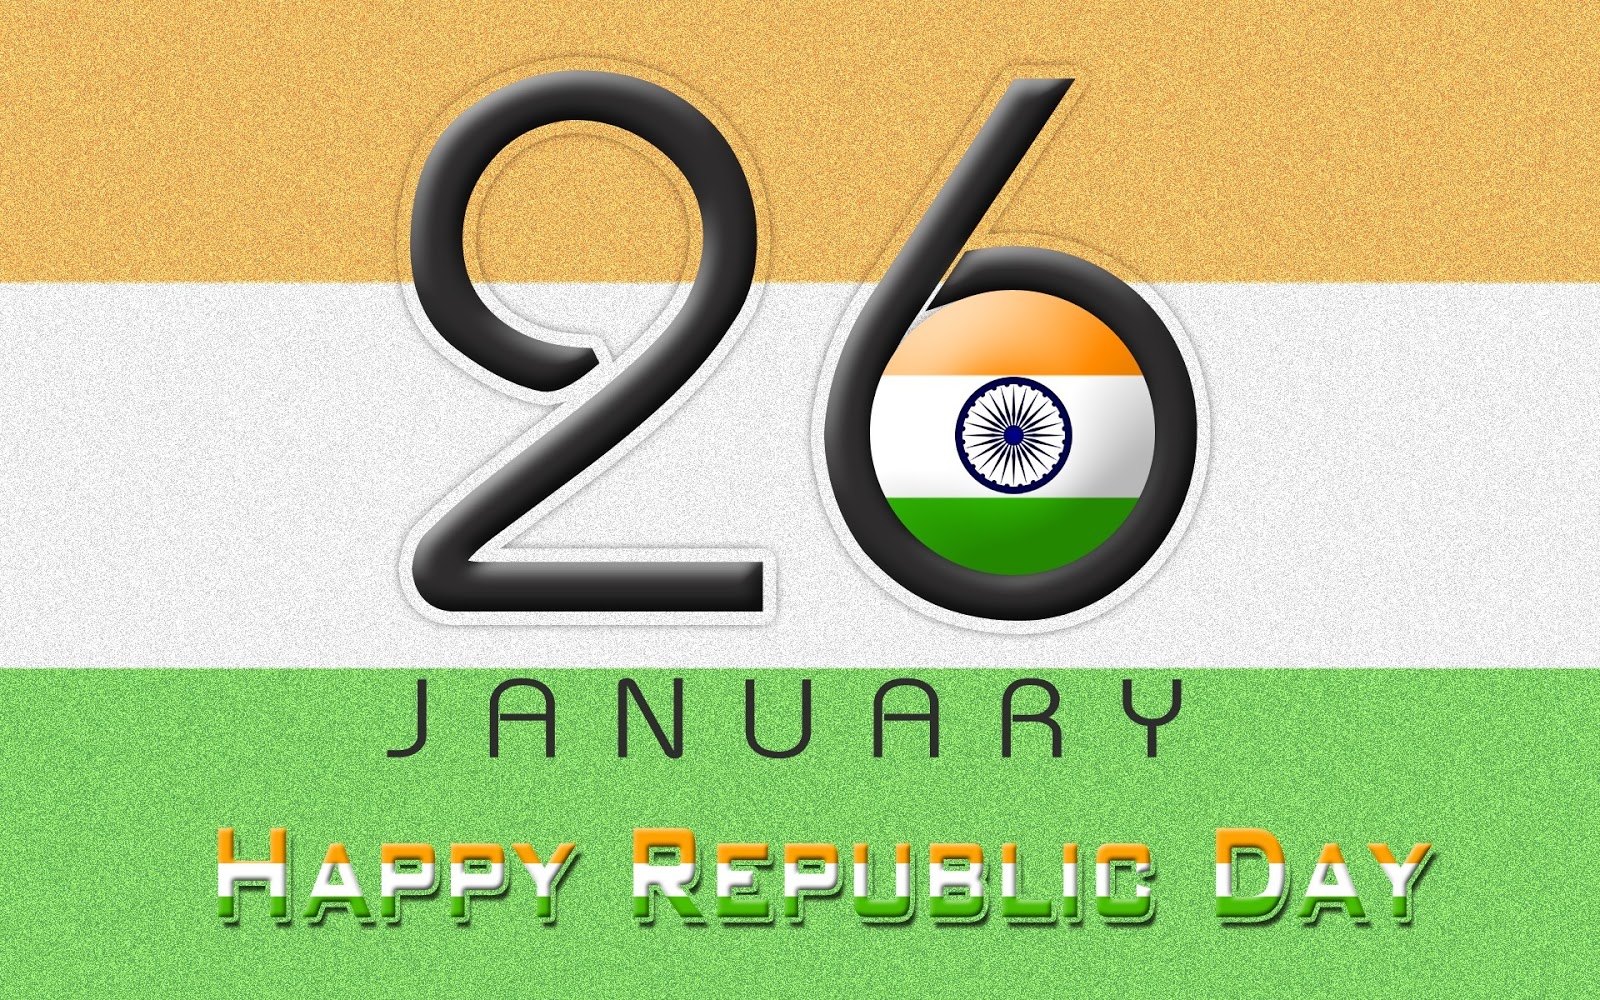 Republic Day 2018 Images - 26 January Image 2018 , HD Wallpaper & Backgrounds